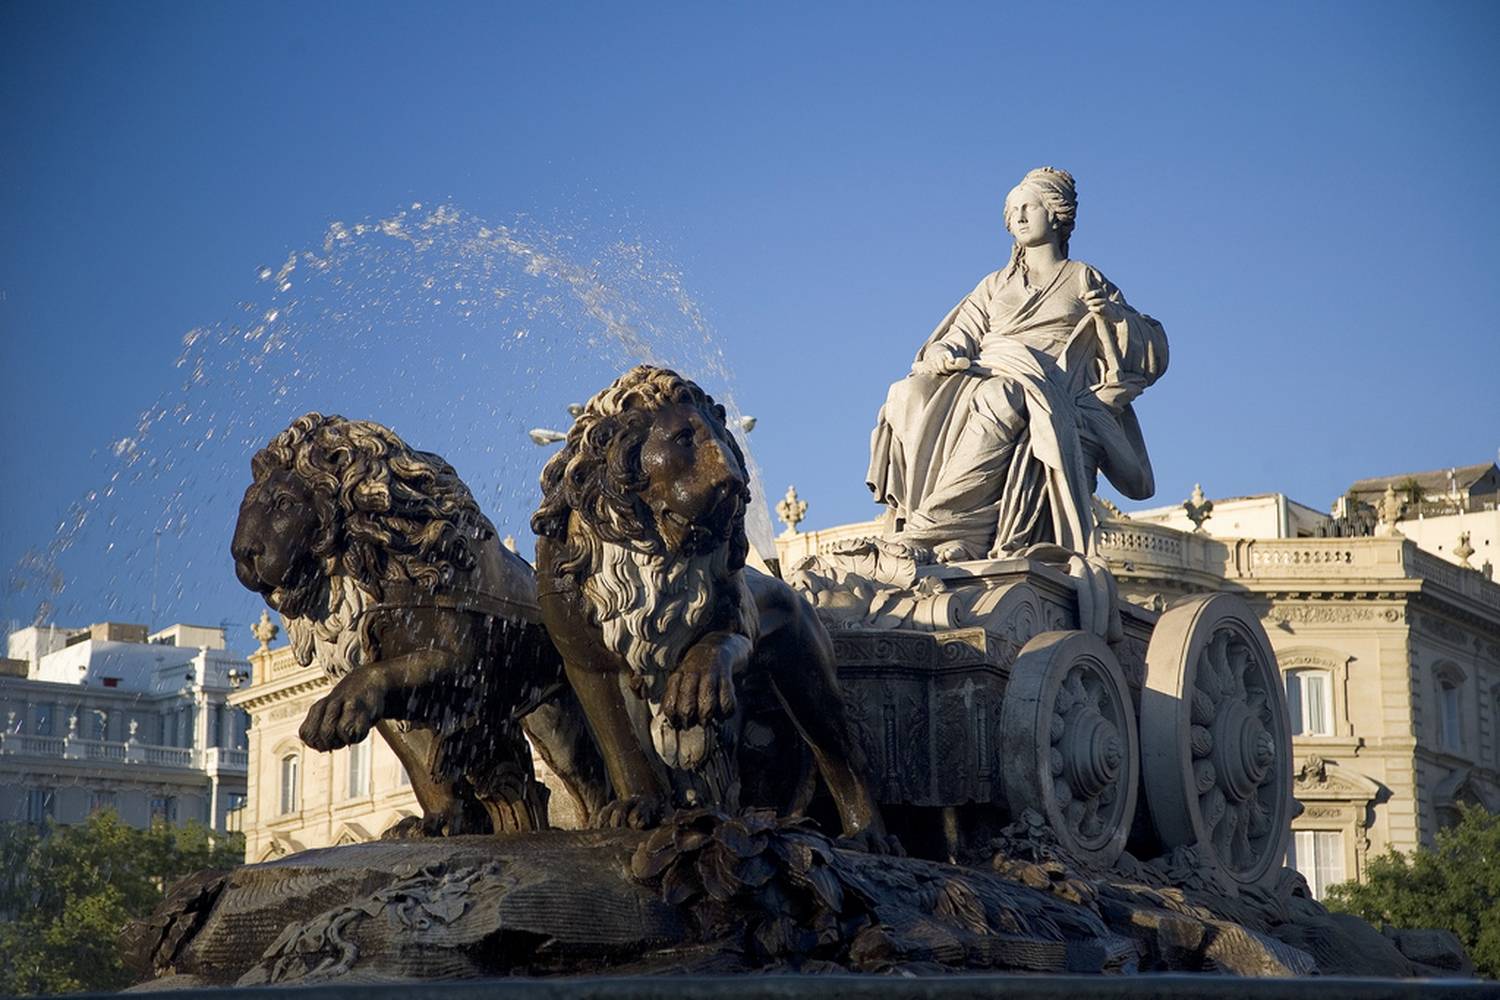 The Greek goddess Cibeles with marble sculptures (5)